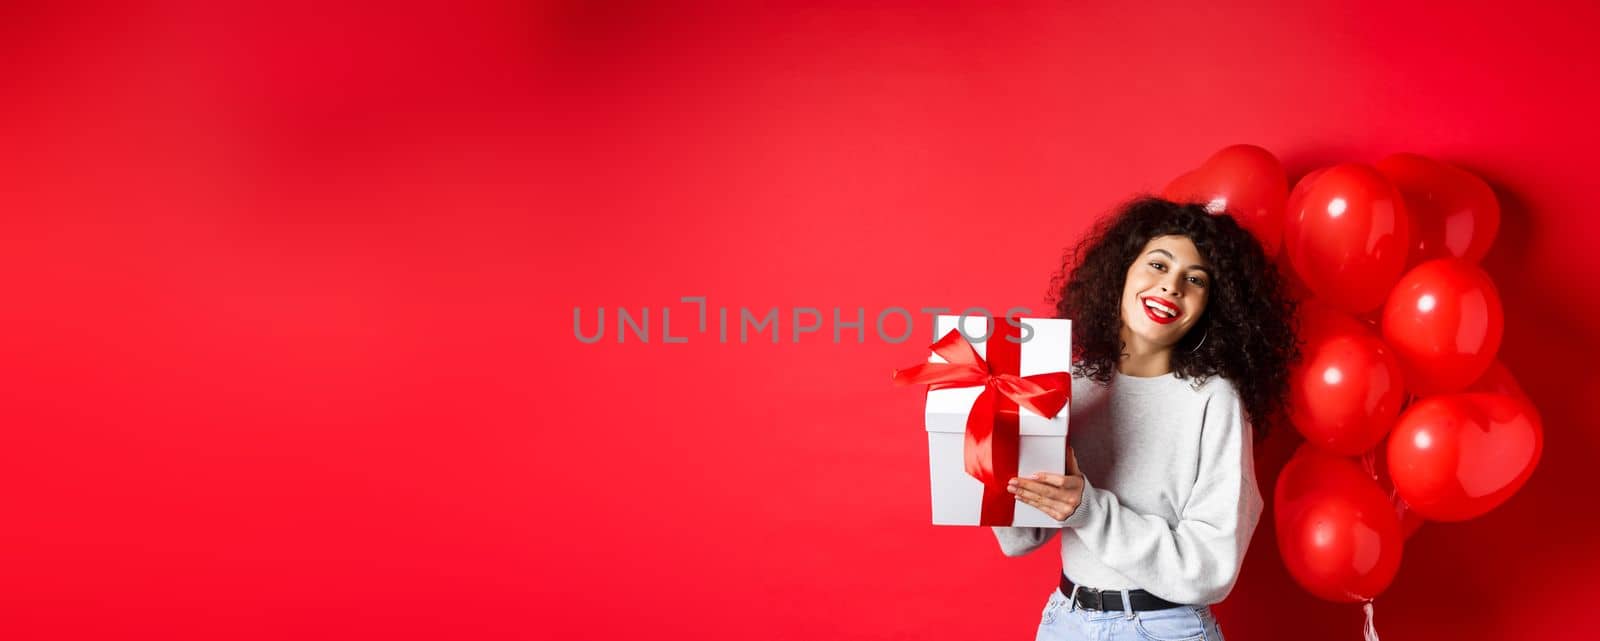 Holidays and celebration. Happy birthday girl holding gift and posing near party helium balloons, smiling excited at camera, red background by Benzoix